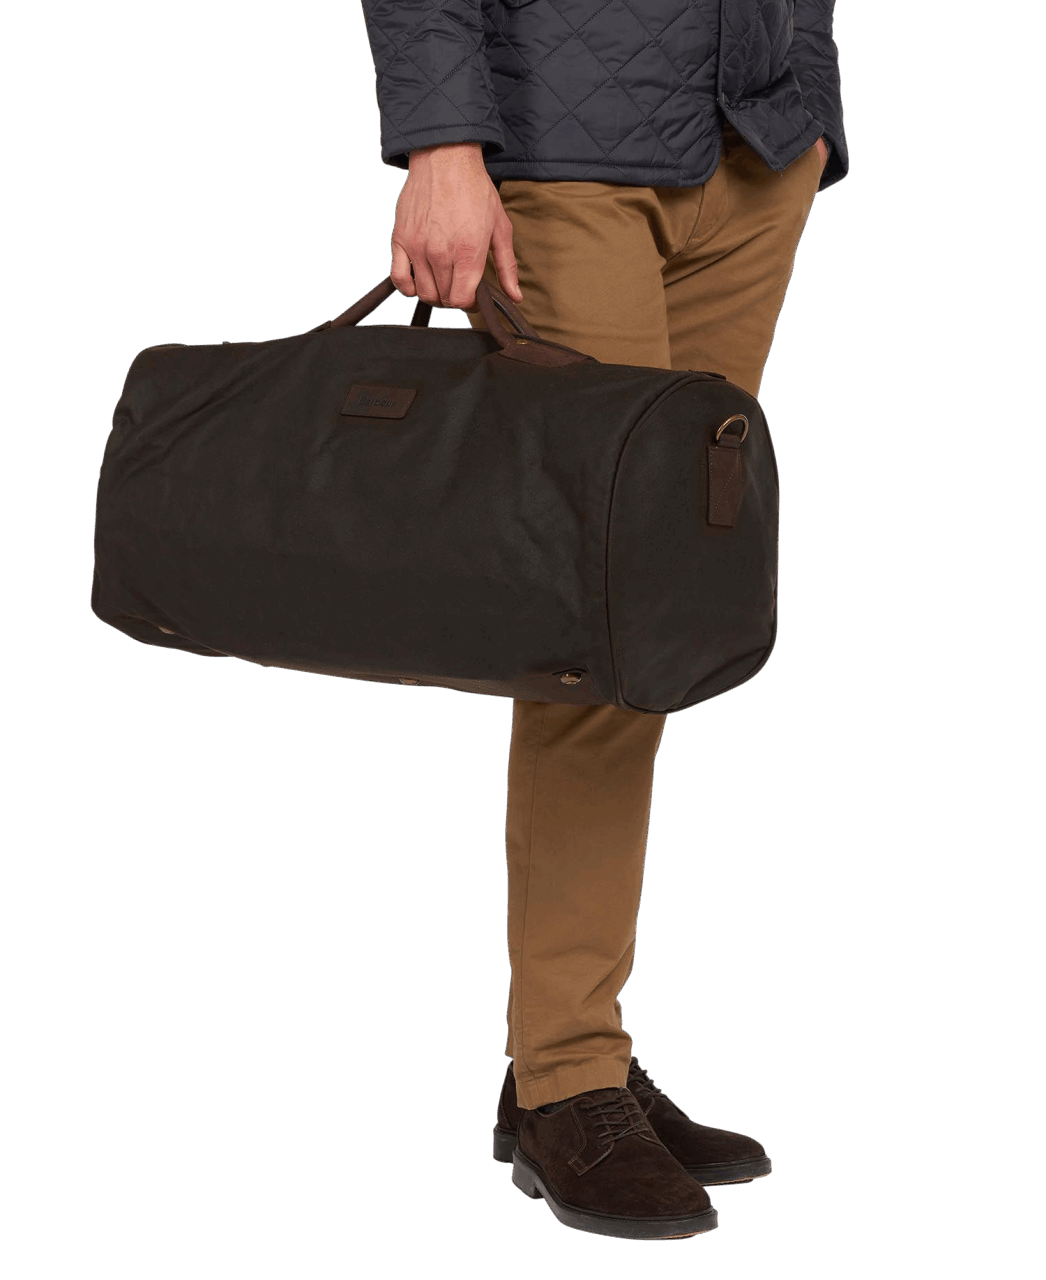 Barbour Wax Holdall Bag - olive